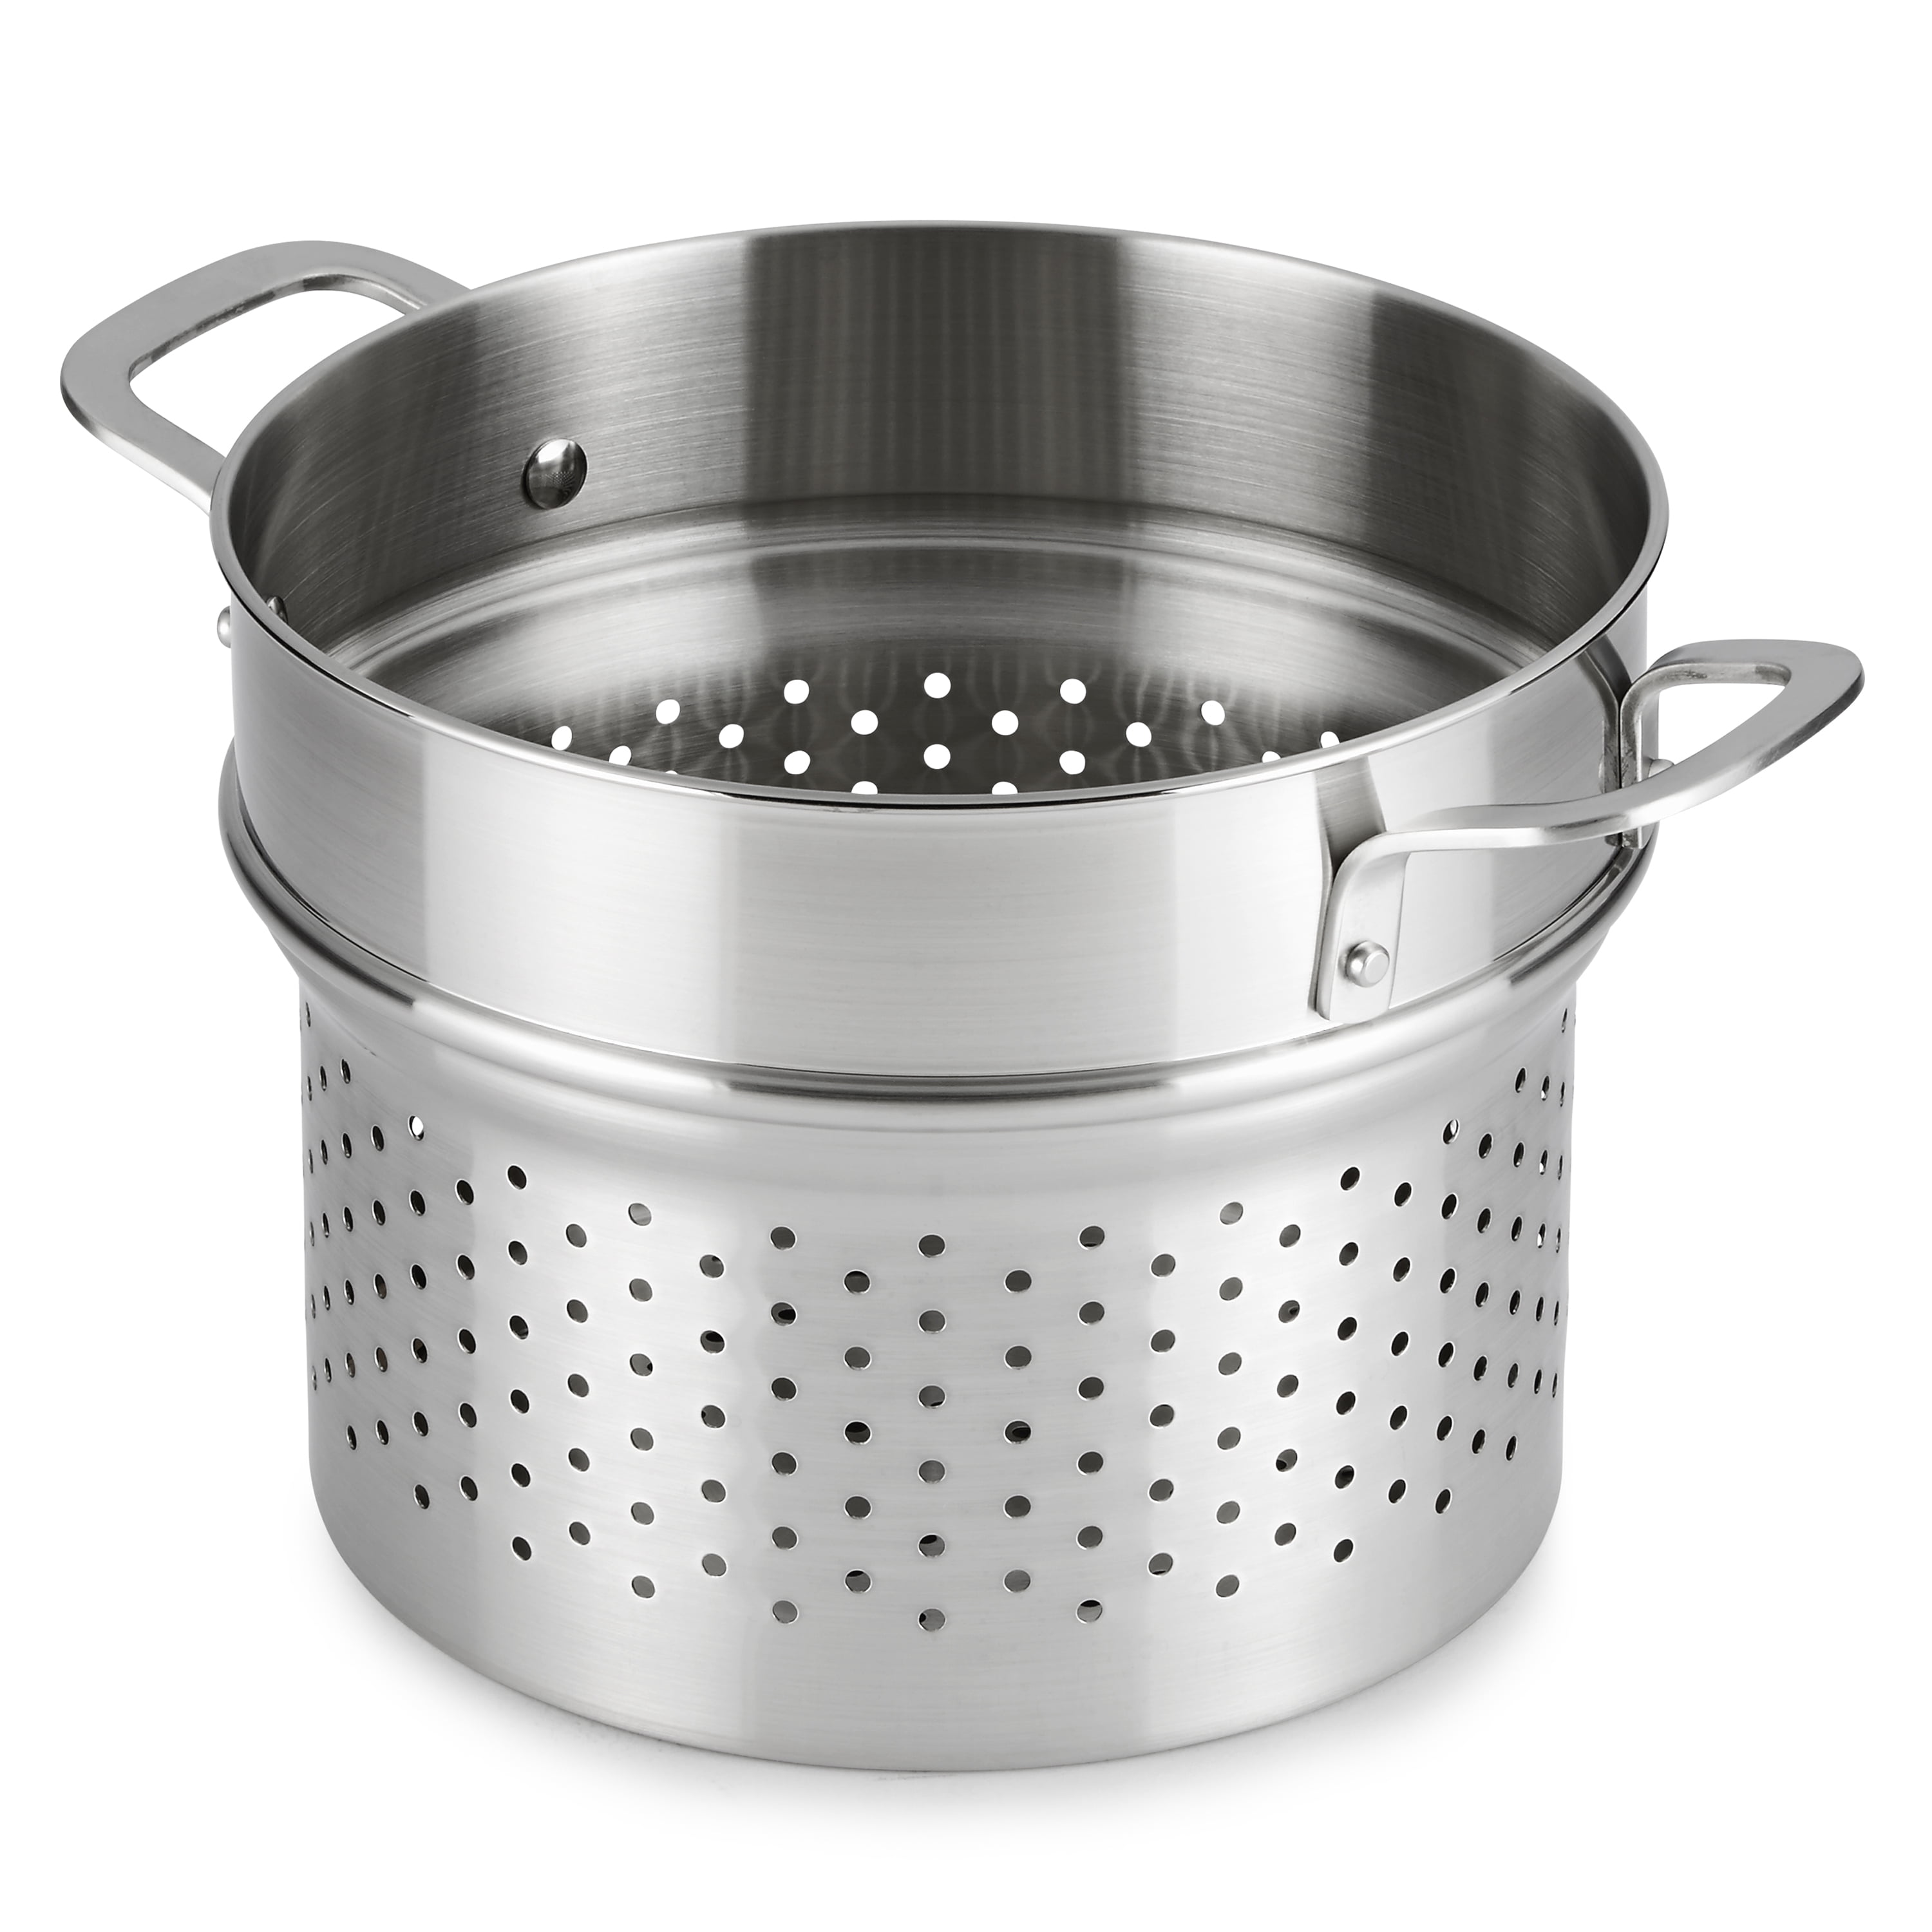 New Calphalon Classic Stainless Steel 8 Qt Stockpot with Strainer & Steamer  Set